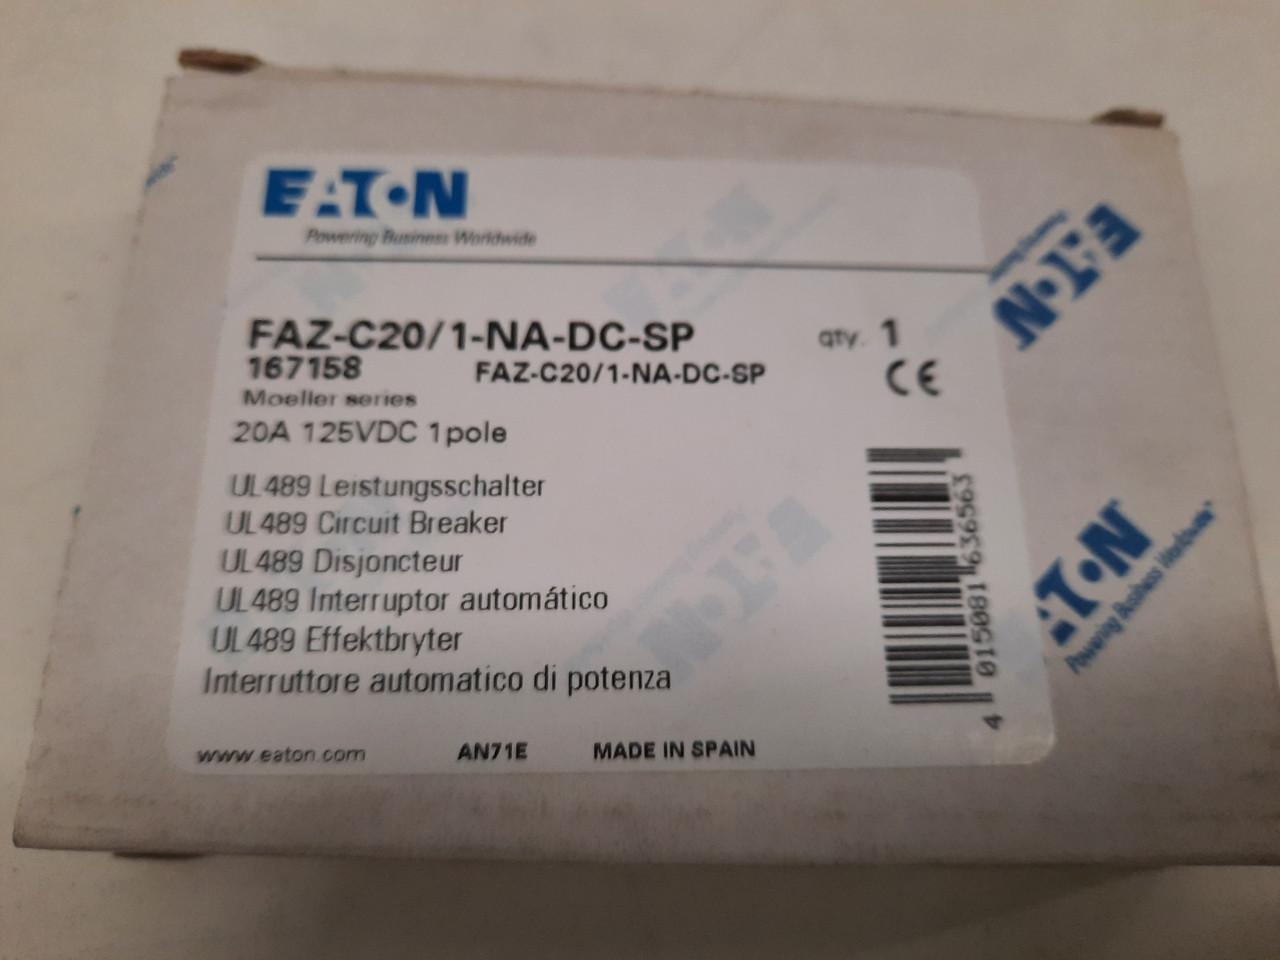 Eaton FAZ-C20/1-NA-DC-SP Eaton FAZ branch protector,UL 489 Industrial miniature circuit breaker-supplementary protector,Single package,Medium levels of inrush current are expected,20A,10 kAIC,Single-pole,125 Vdc per pole,5-10X/n,Q38,50-60 Hz,Screw terminals,C Curve